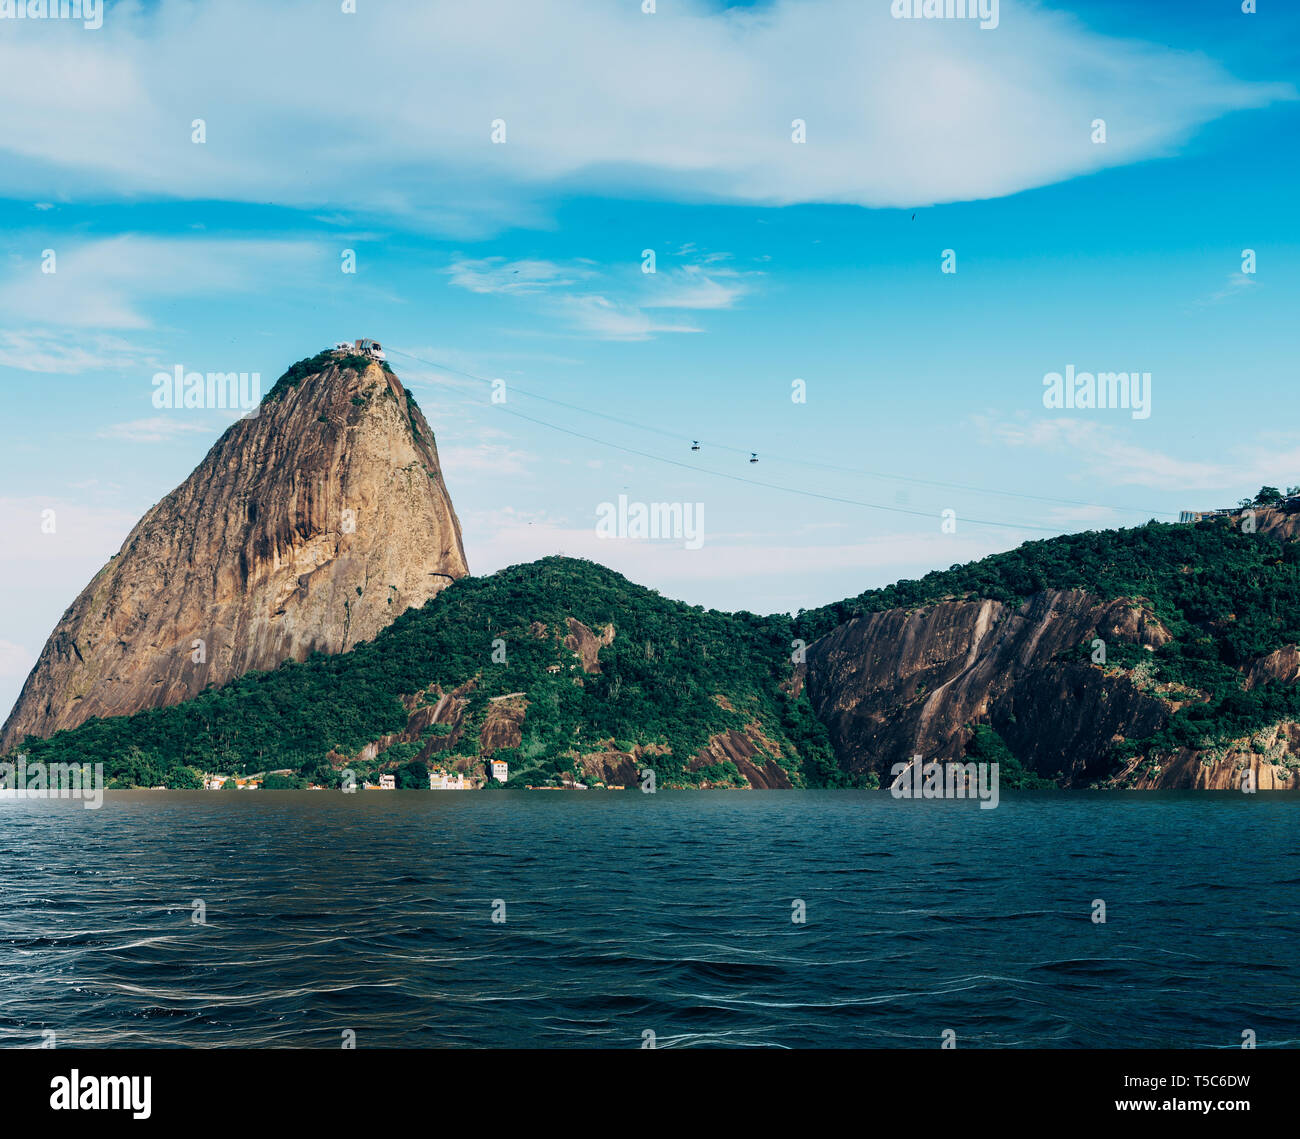 Digital composite of flooded SugarLoaf Mountain in Rio de Janeiro, Brazil - global warming rising sea levels environmental damage concept Stock Photo